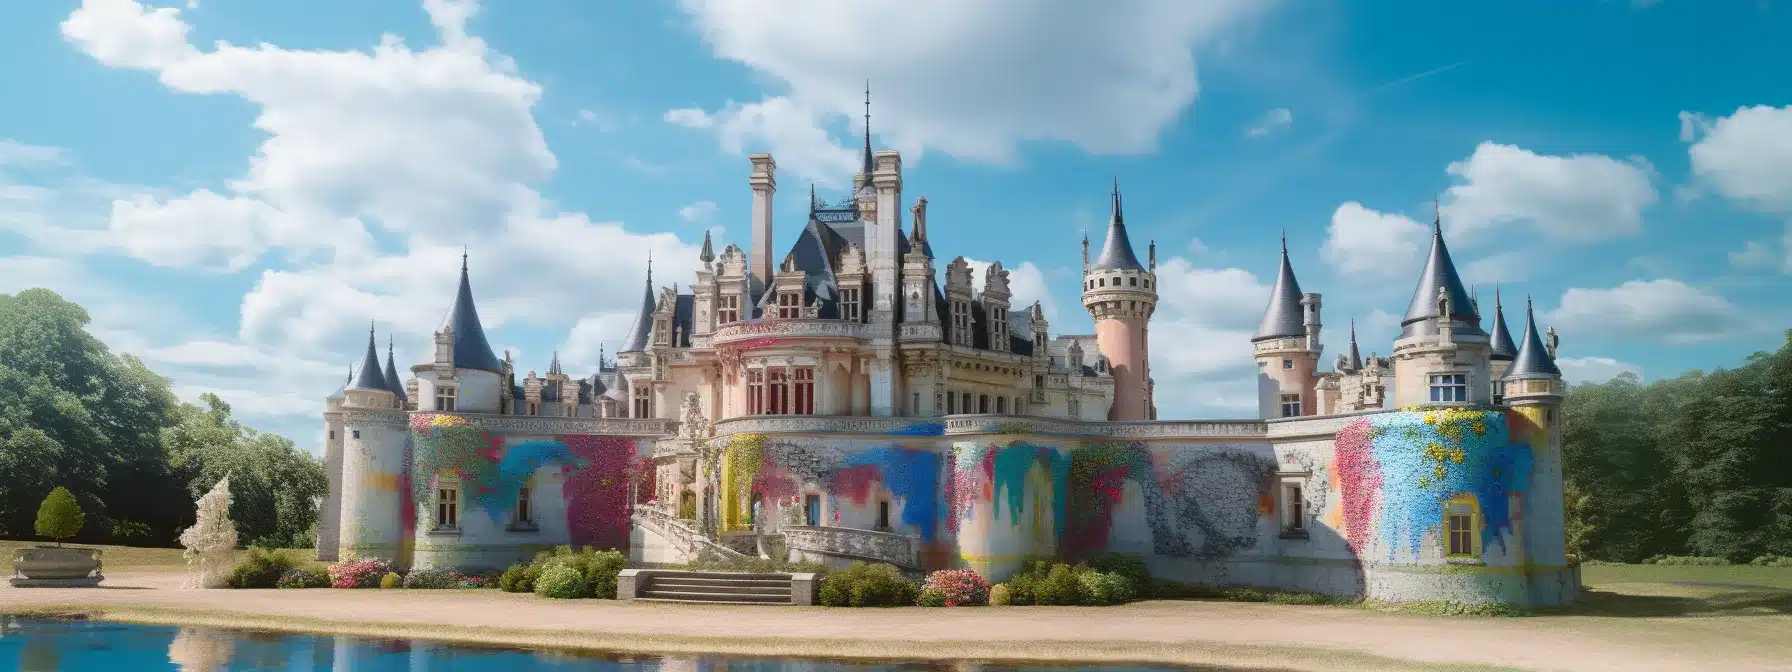 A Castle Being Painted With Fresh, Vibrant Colors.